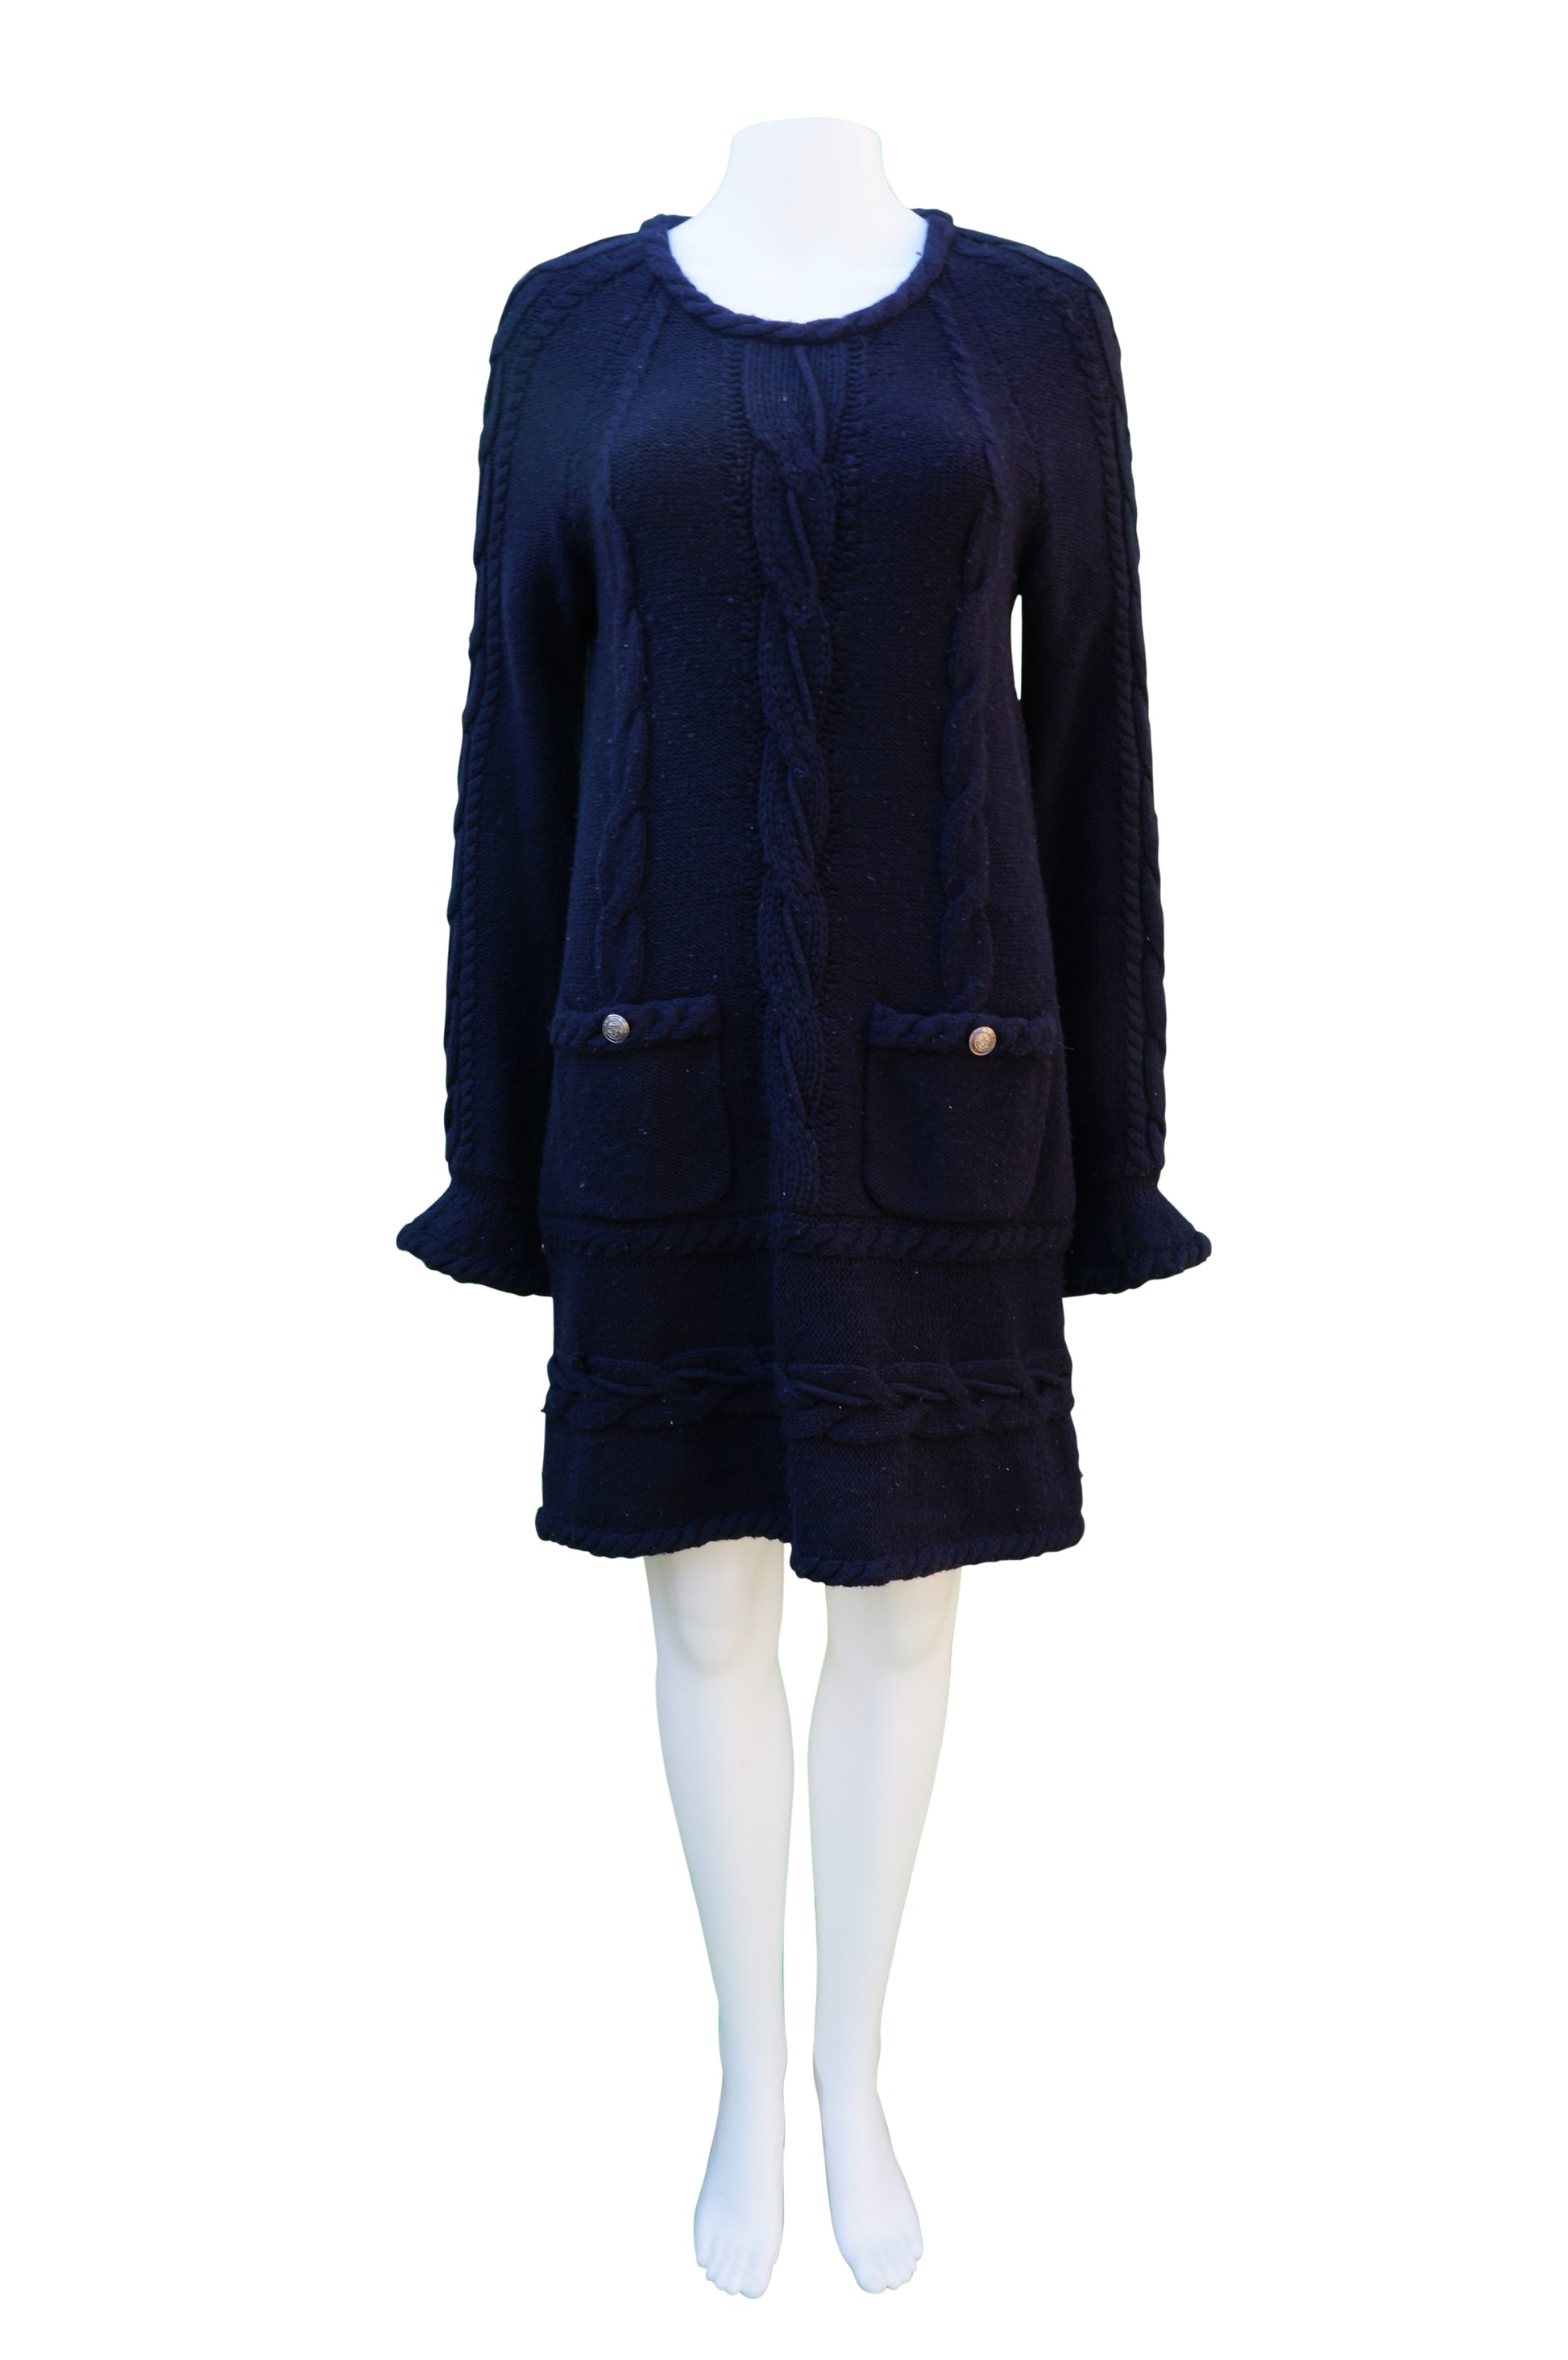 Chanel Navy Knit Sweater Dress Mid length wool cashmere 